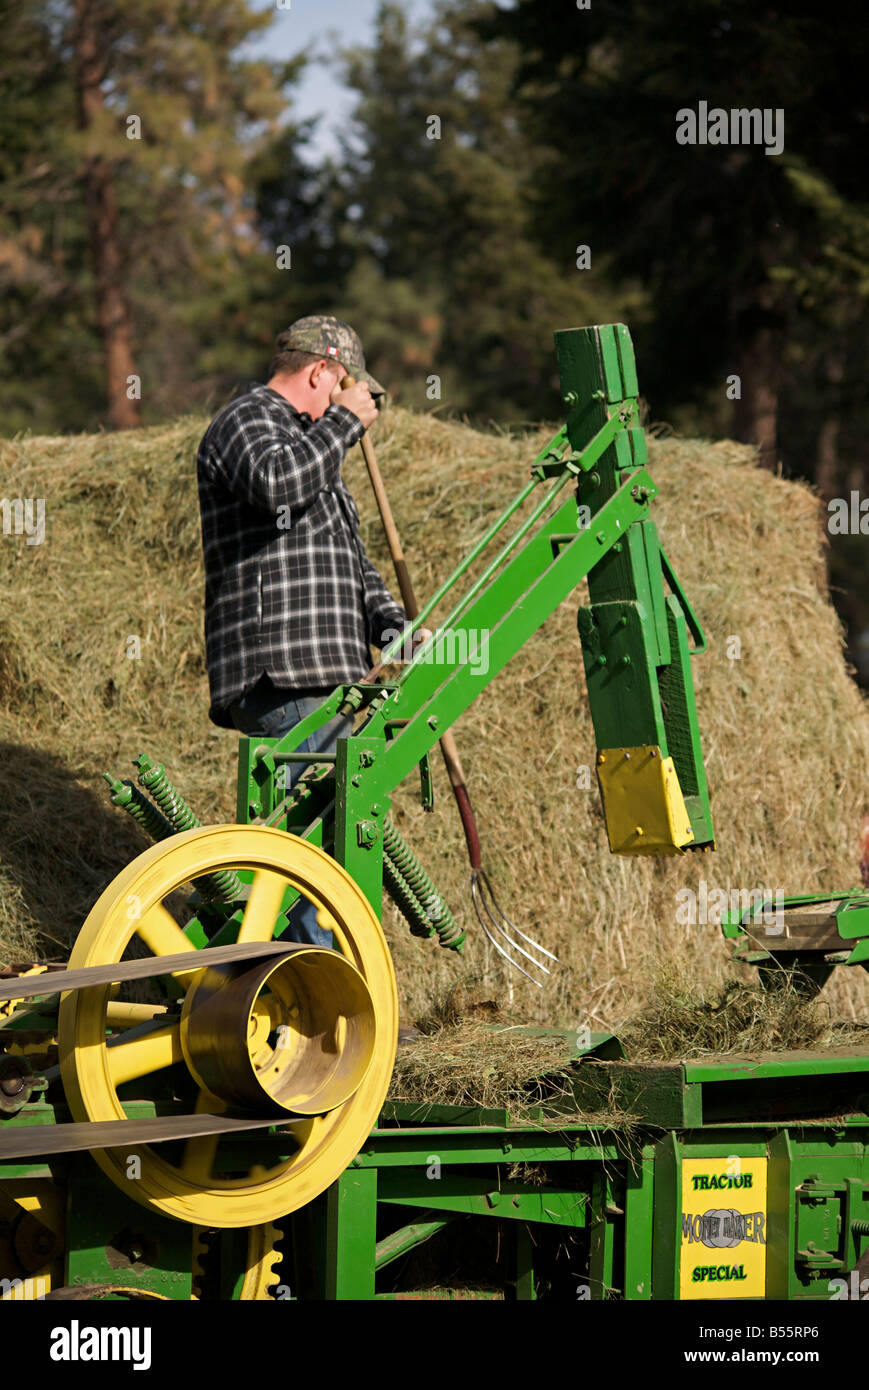 Hay bailing demonstration with a belt driven hay press during steam engine show, Westwold, "British Columbia", Canada Stock Photo